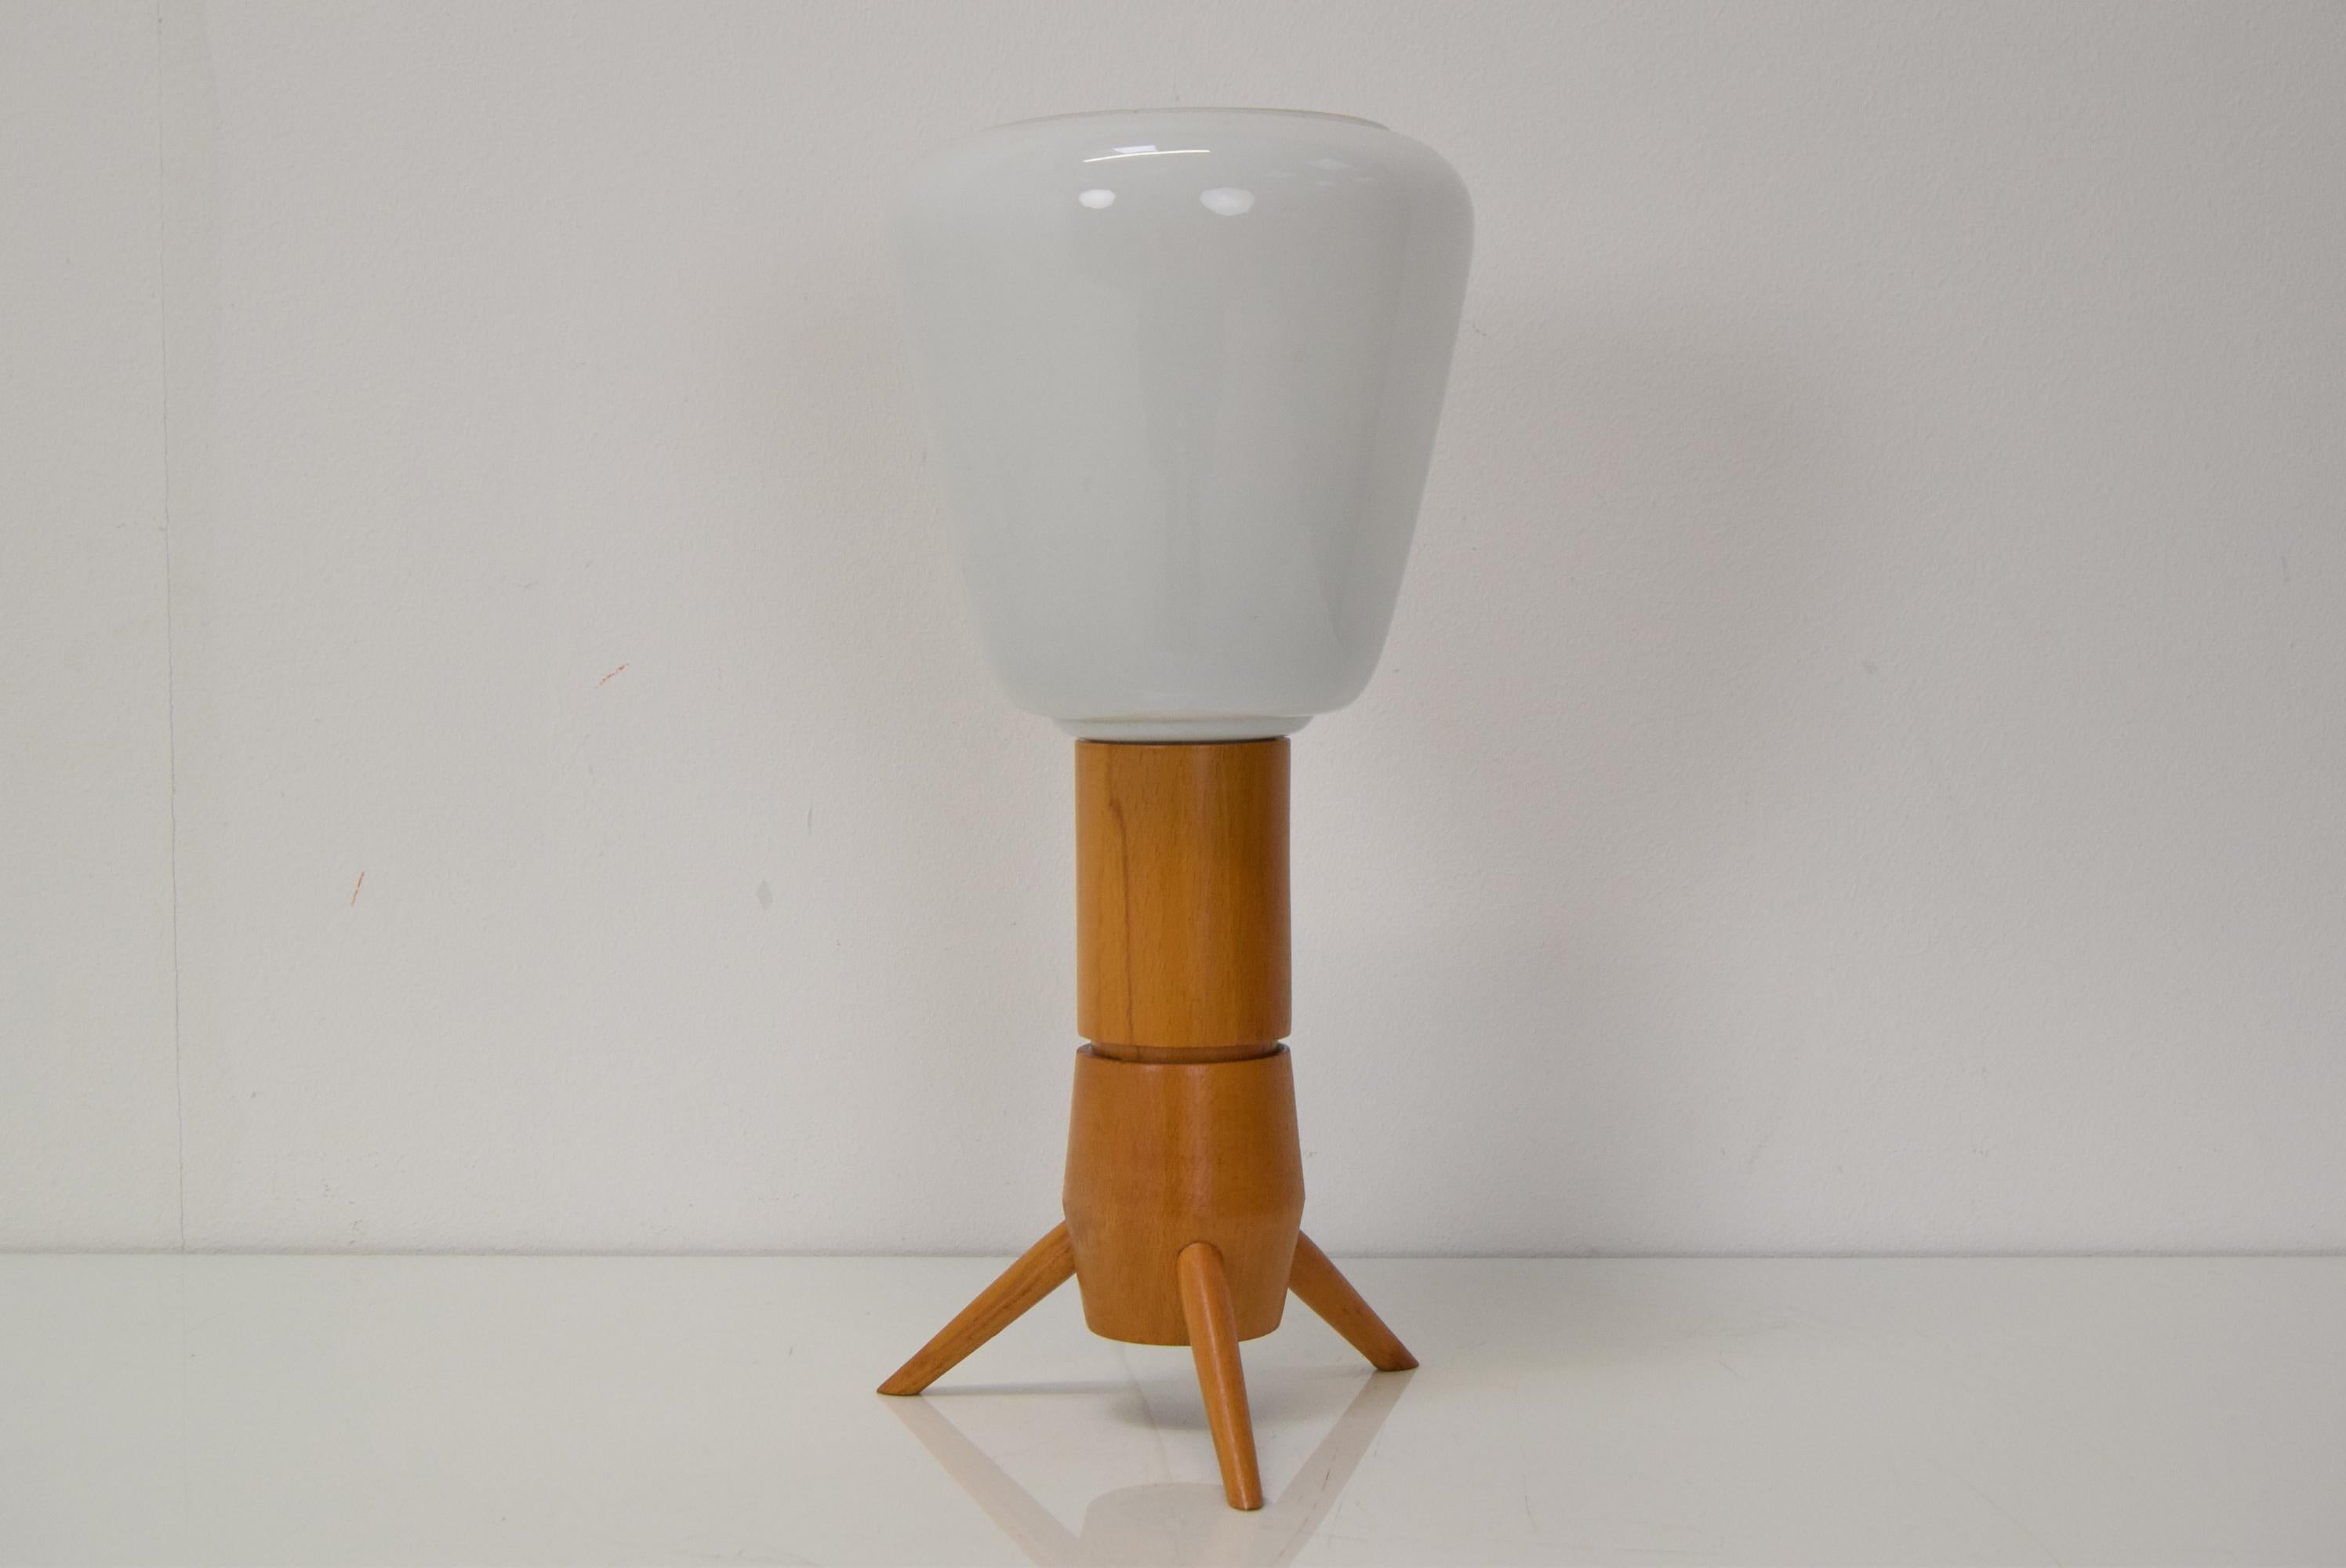 
The lamp is made of Wood and Opaline Glass
The lamp was completely disassembled and cleaned
It is equipped with a new electrical installation
1x E27 or E26 bulb
US adapter included
With Aged Patina
Good Condition

